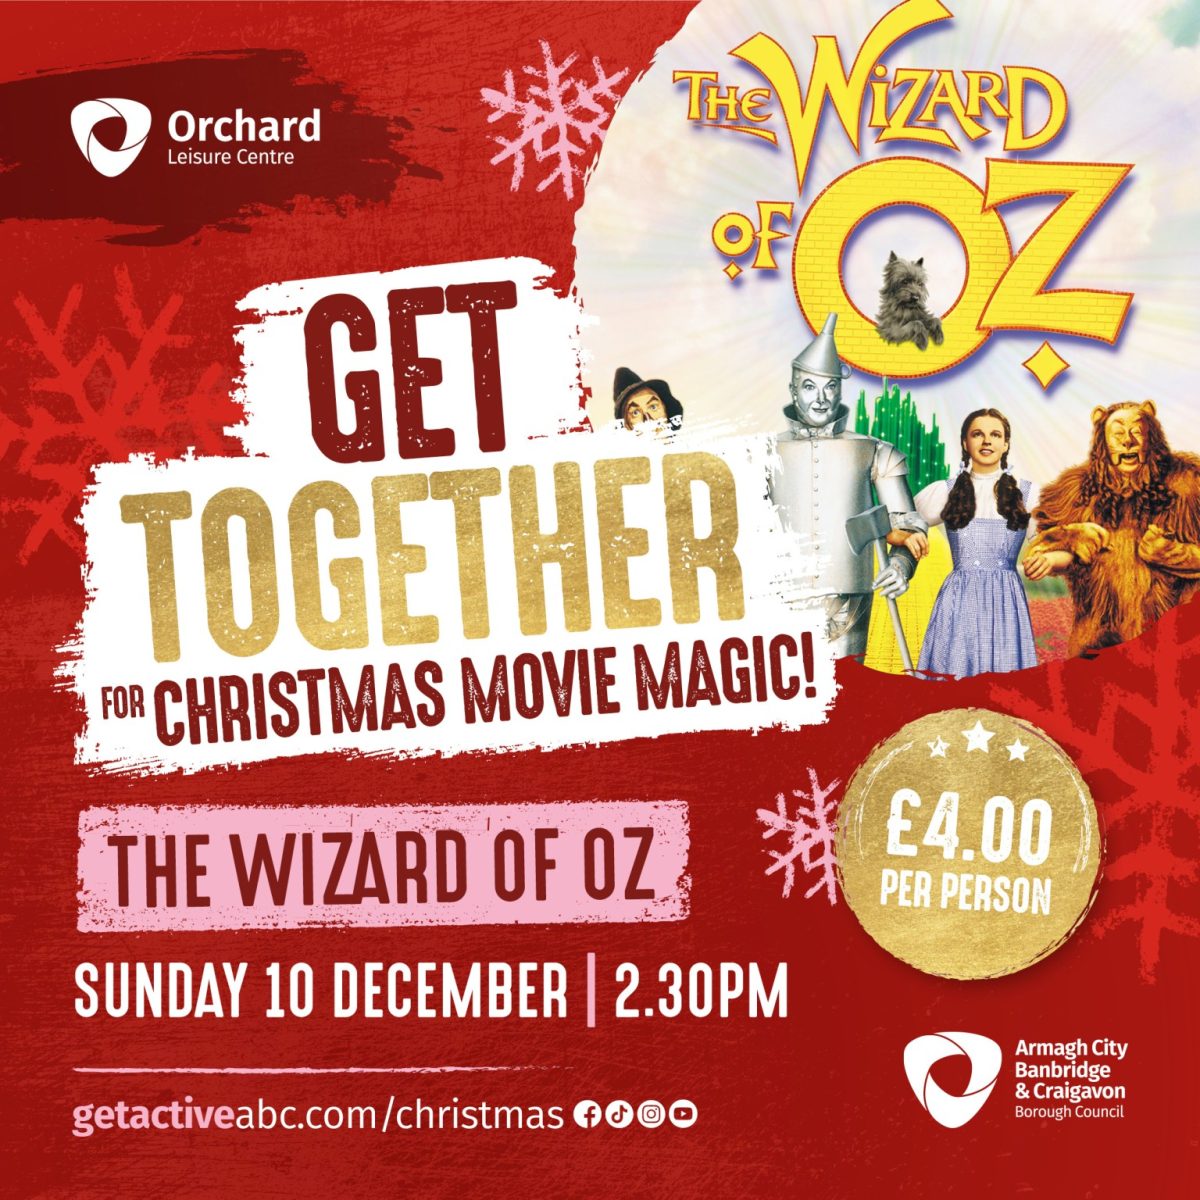 Wizard of Oz at Orchard Leisure Centre Sunday 10 December